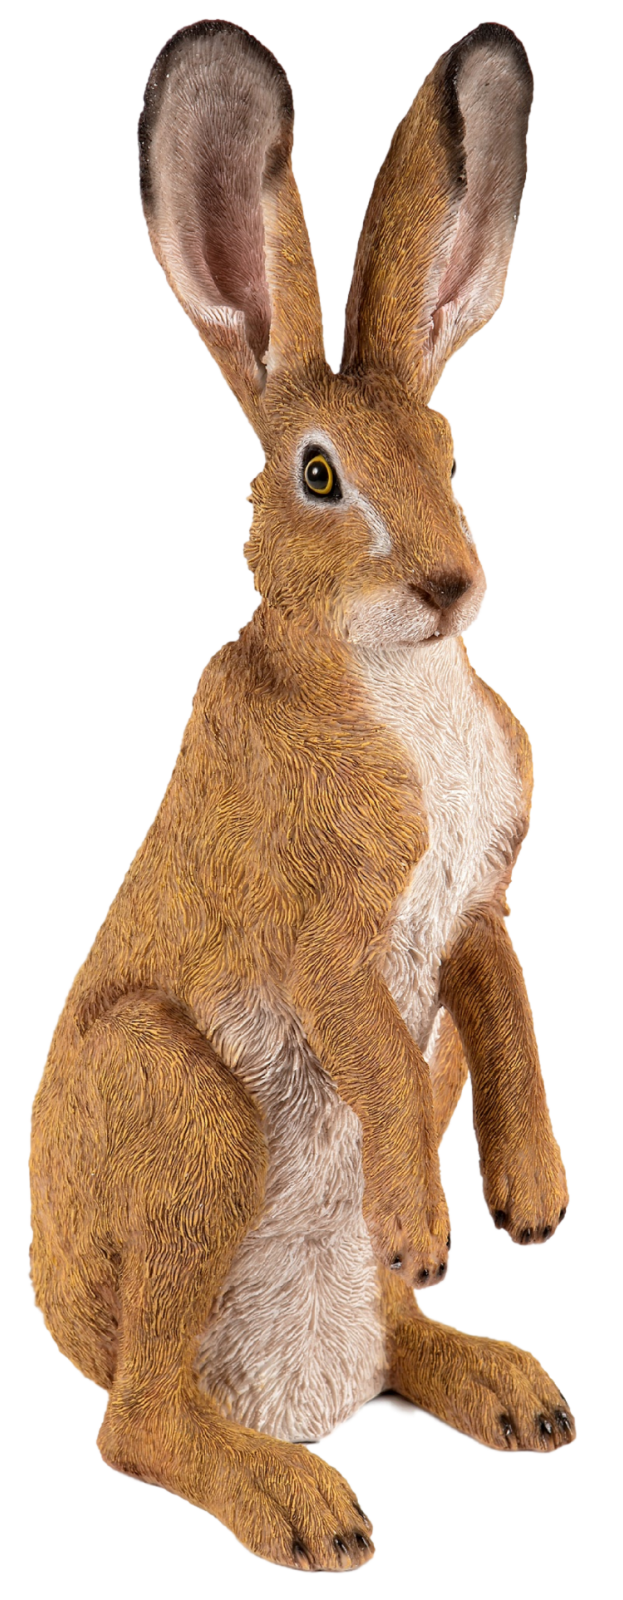 Hare Garden Ornament Statue Sitting Home Décor Resin Frostproof 52cm Large